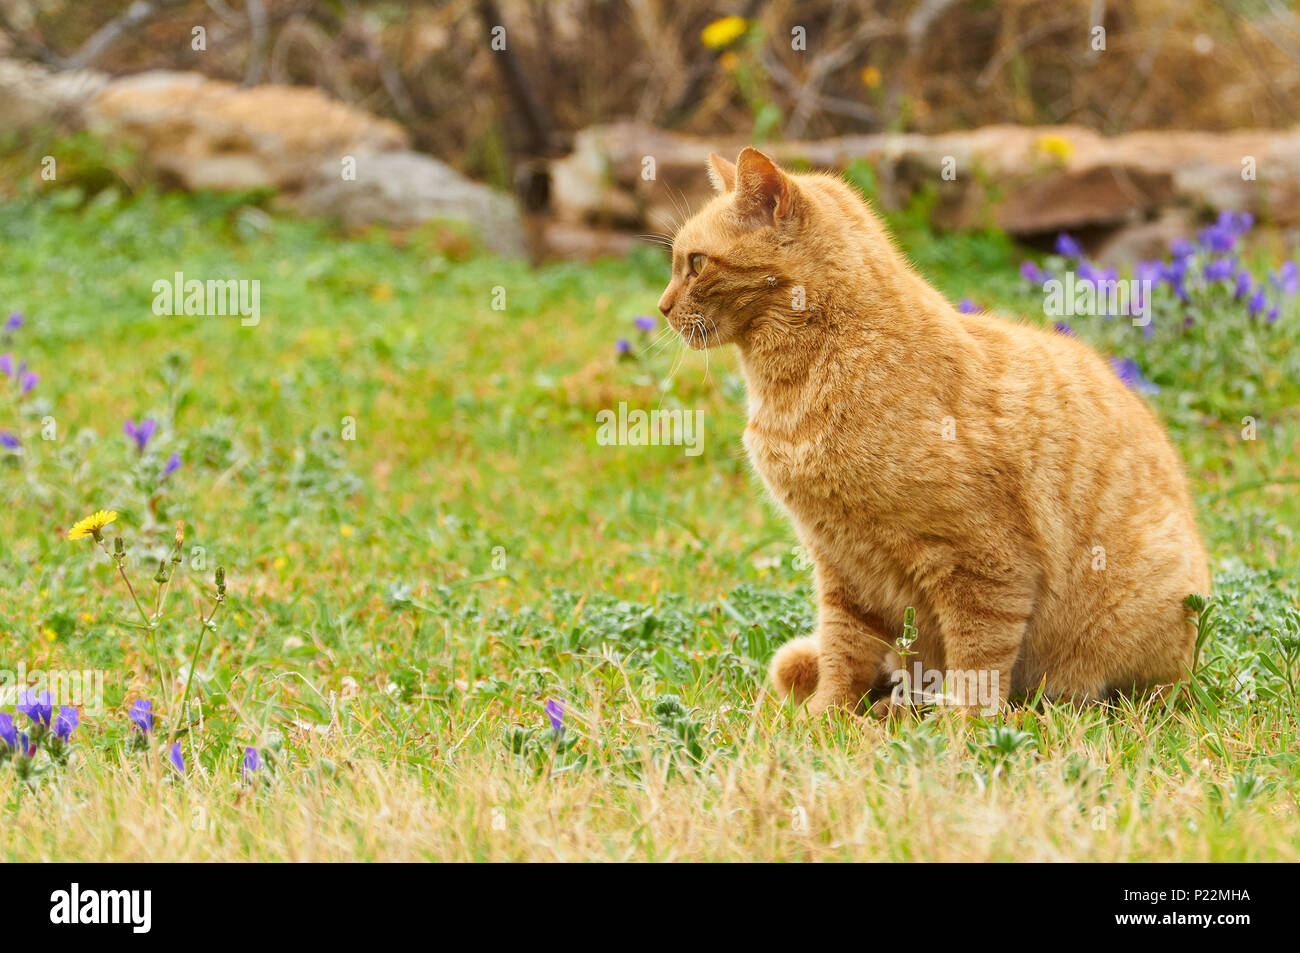 Ginger domestic cat (Felis silvestris catus) in a green grass field with flowers (Formentera, Balearic Islands, Spain) Stock Photo